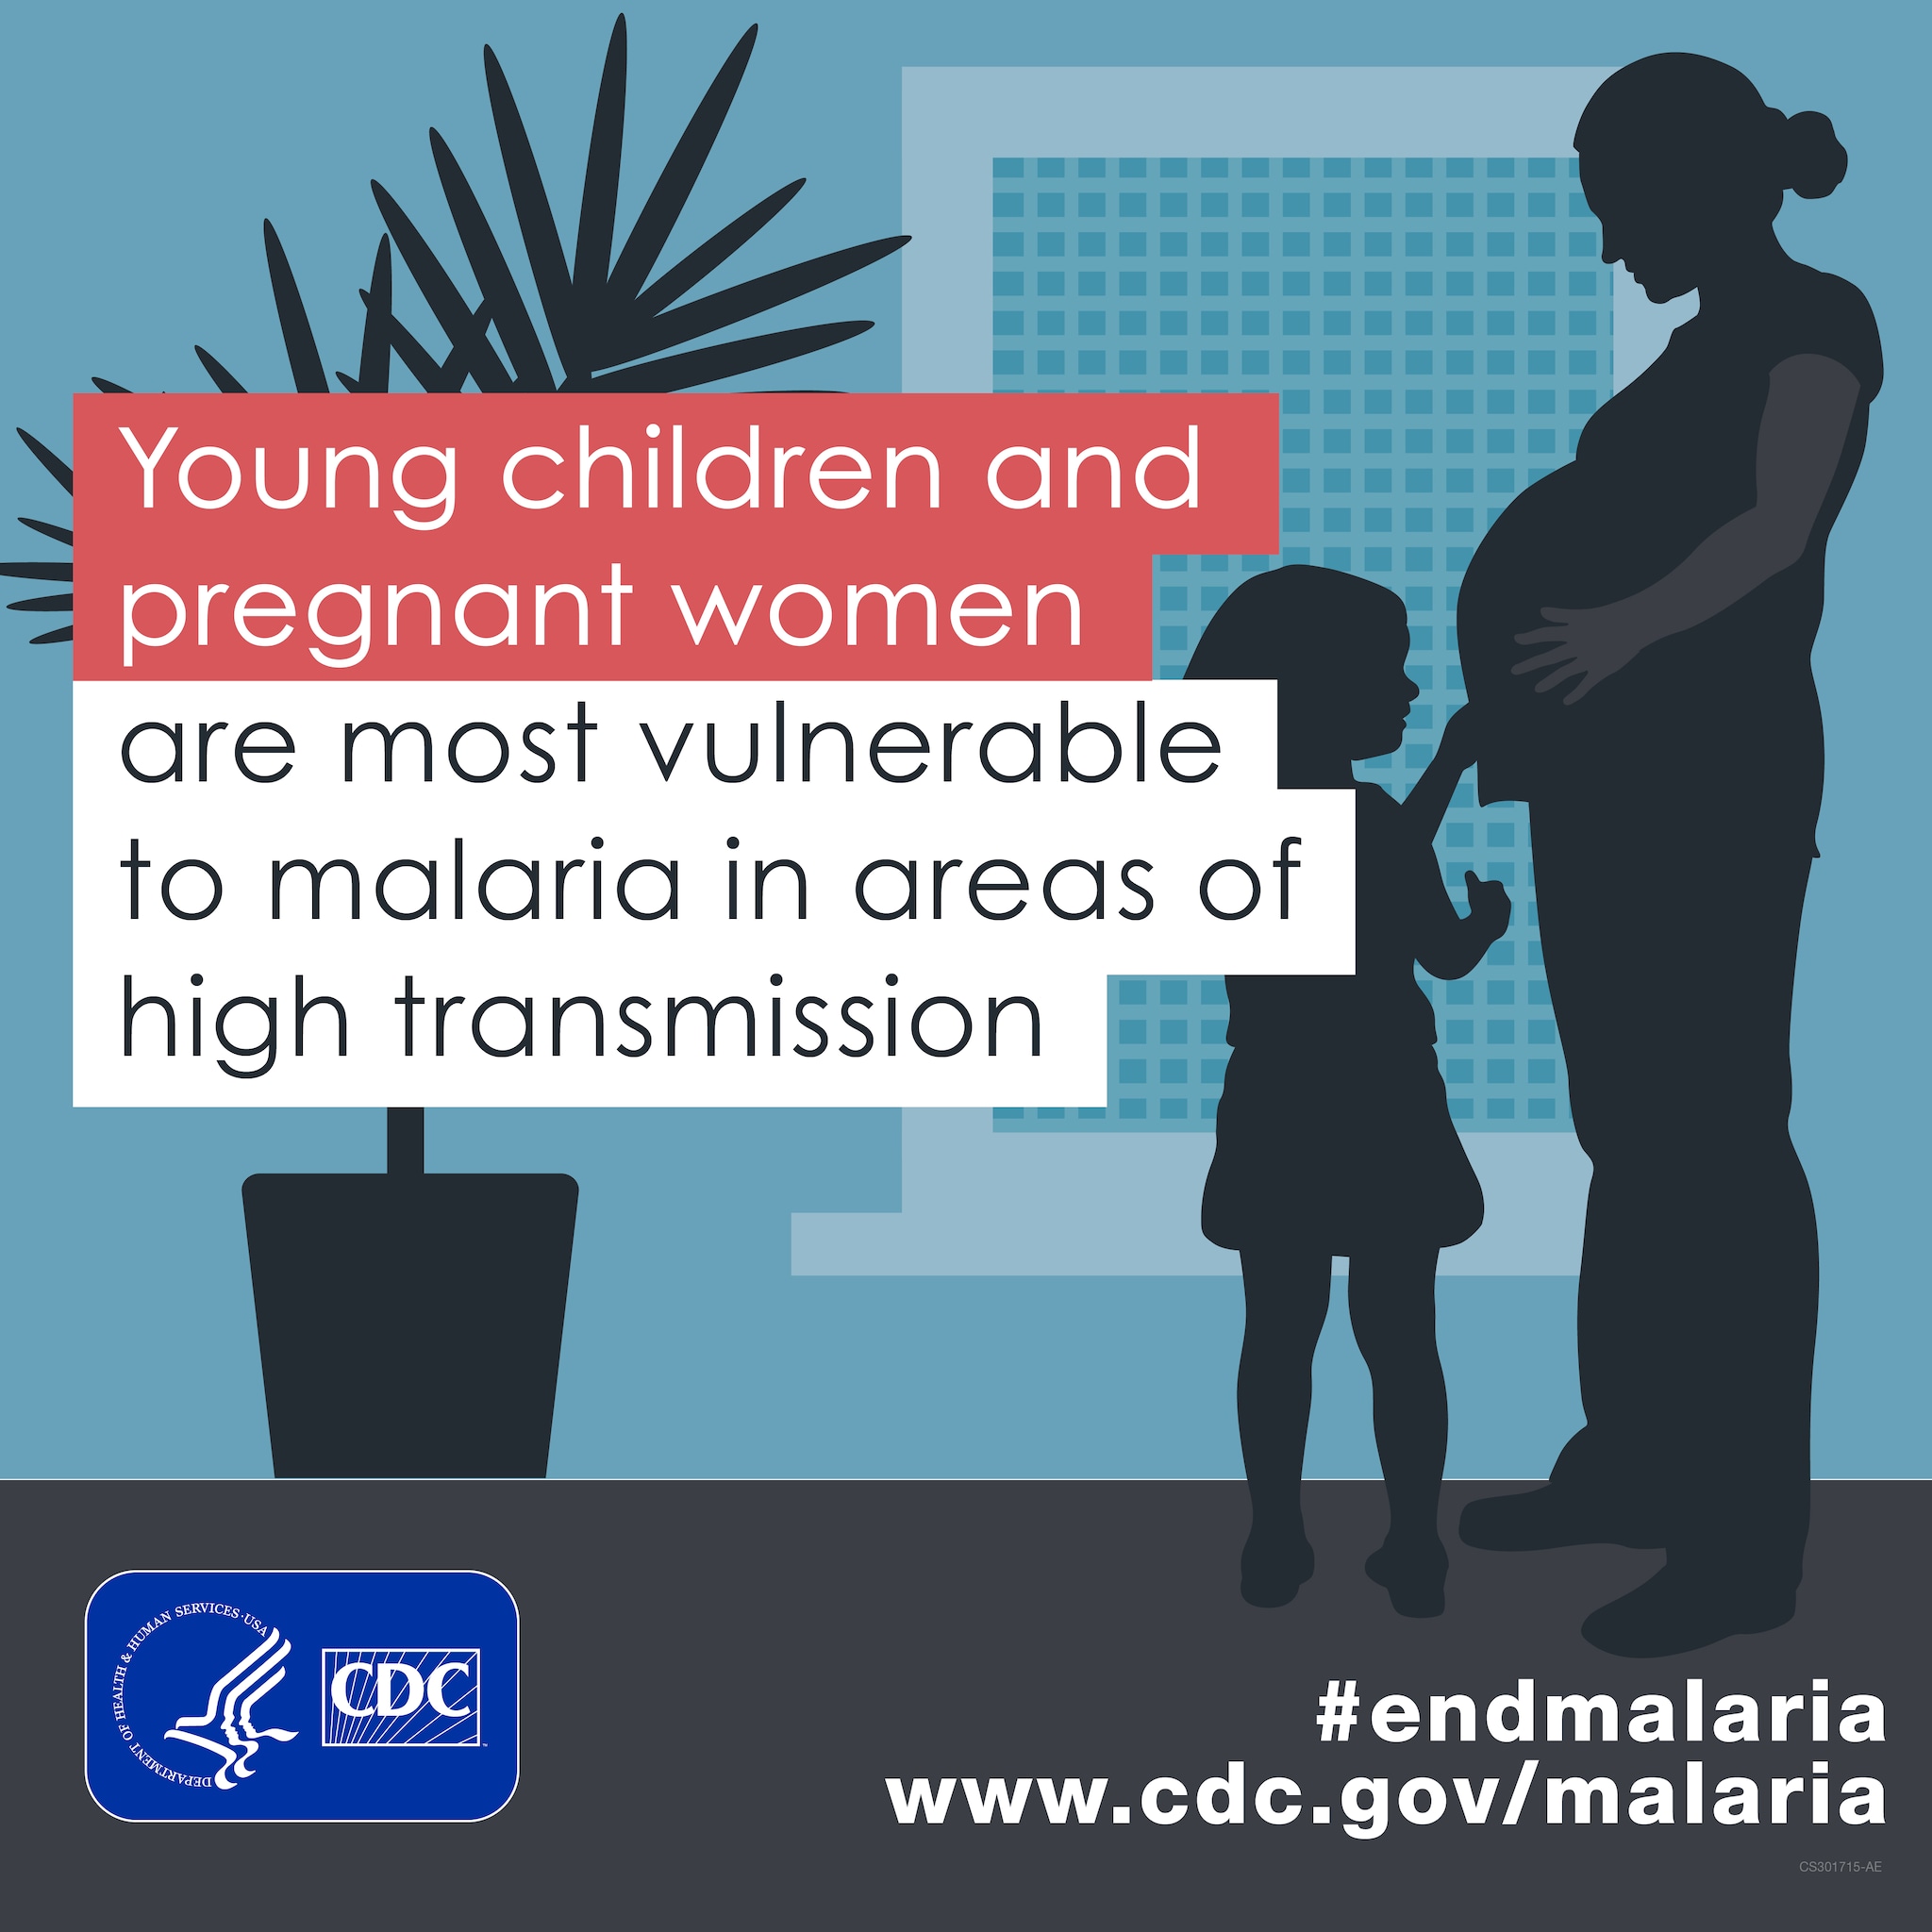 Young children & pregnant women are most vulnerable to malaria in areas of high transmission